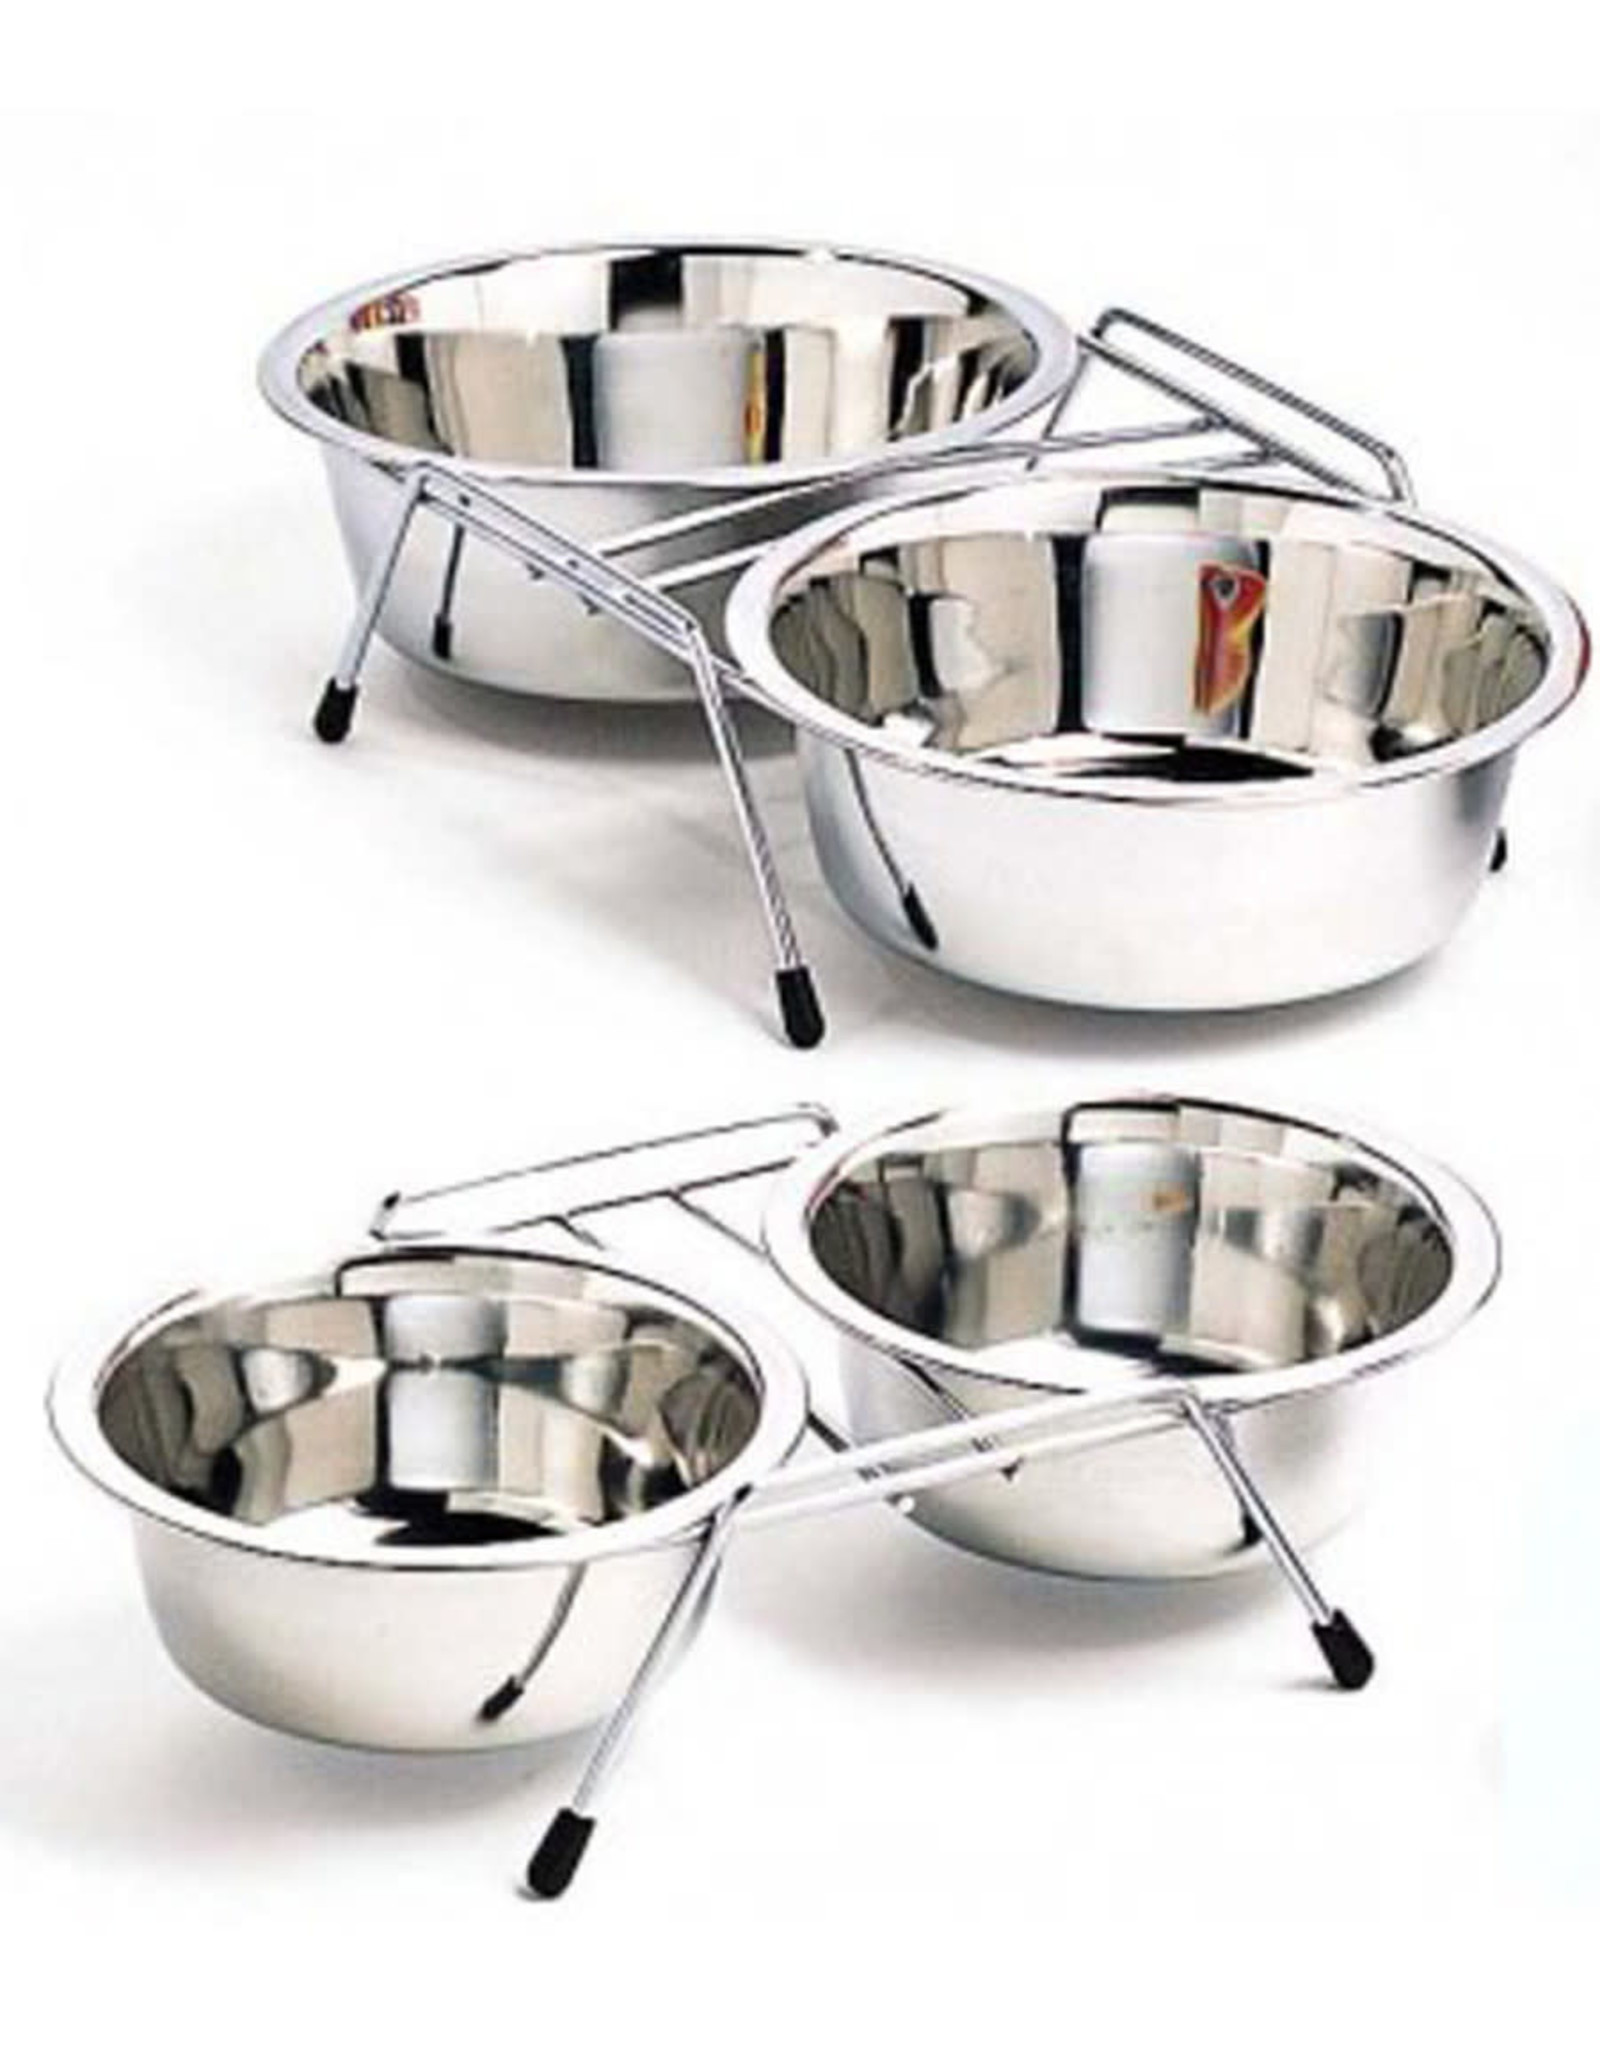 ETHICAL PRODUCTS Spot Diner Time Stainless Double Diner Dog Bowl Silver 1ea/1 pt